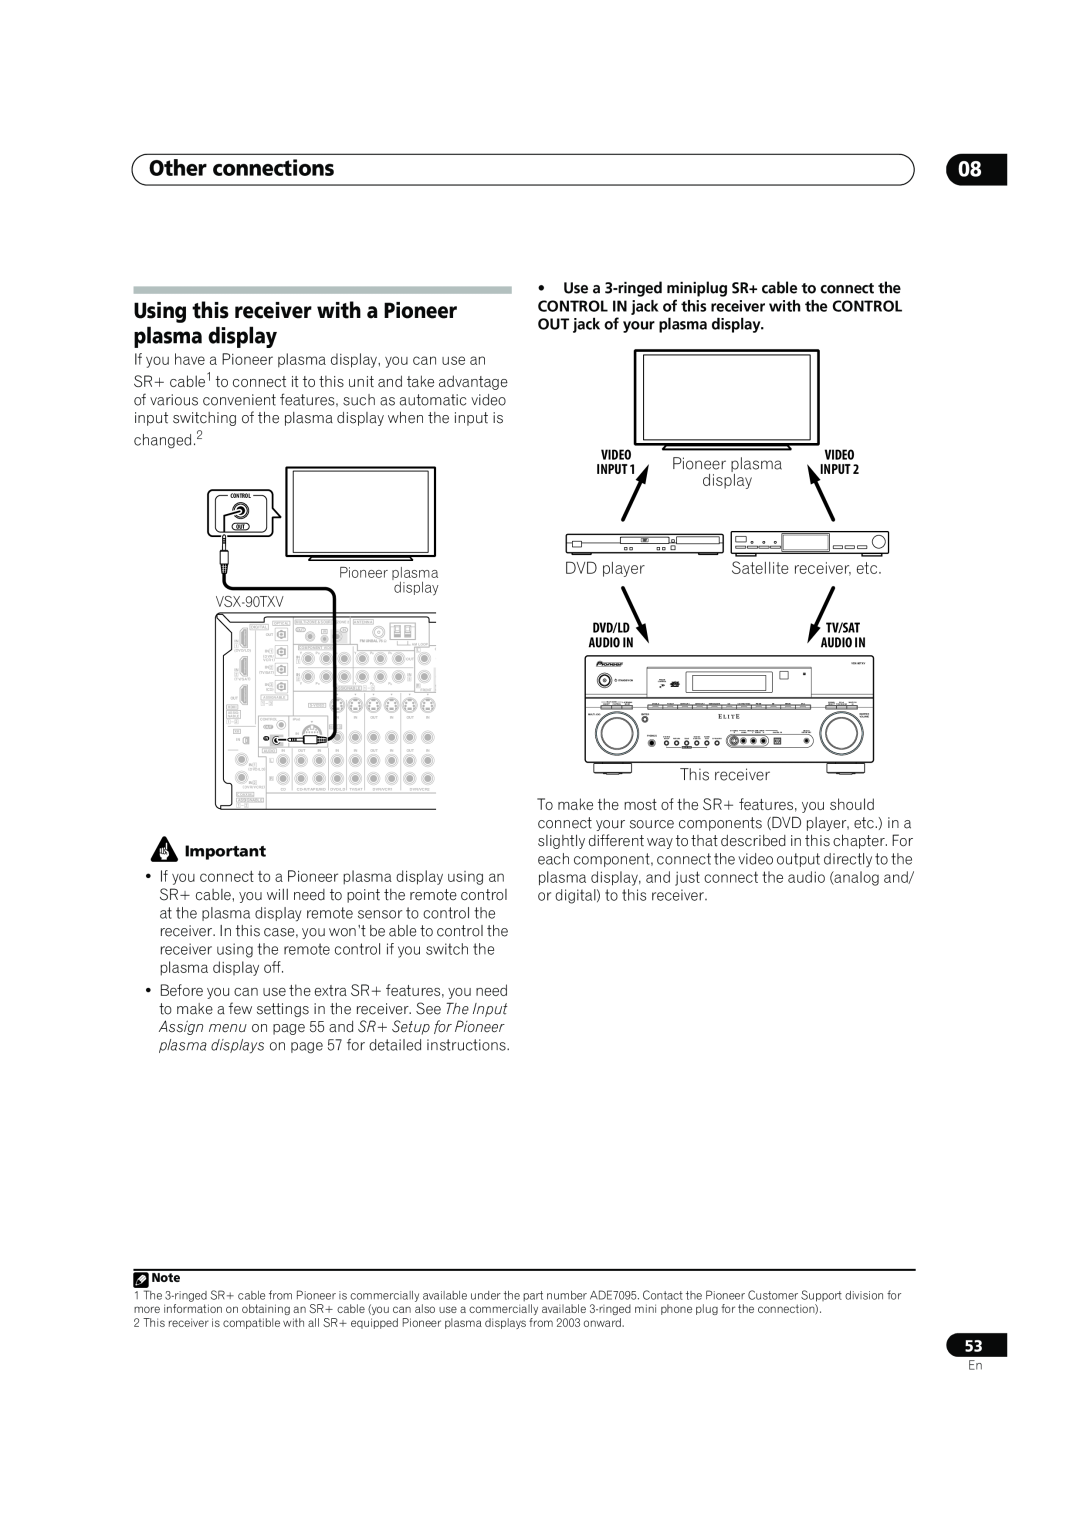 Pioneer VSX-90TXV operating instructions Using this receiver with a Pioneer plasma display, DVD player, Other connections 